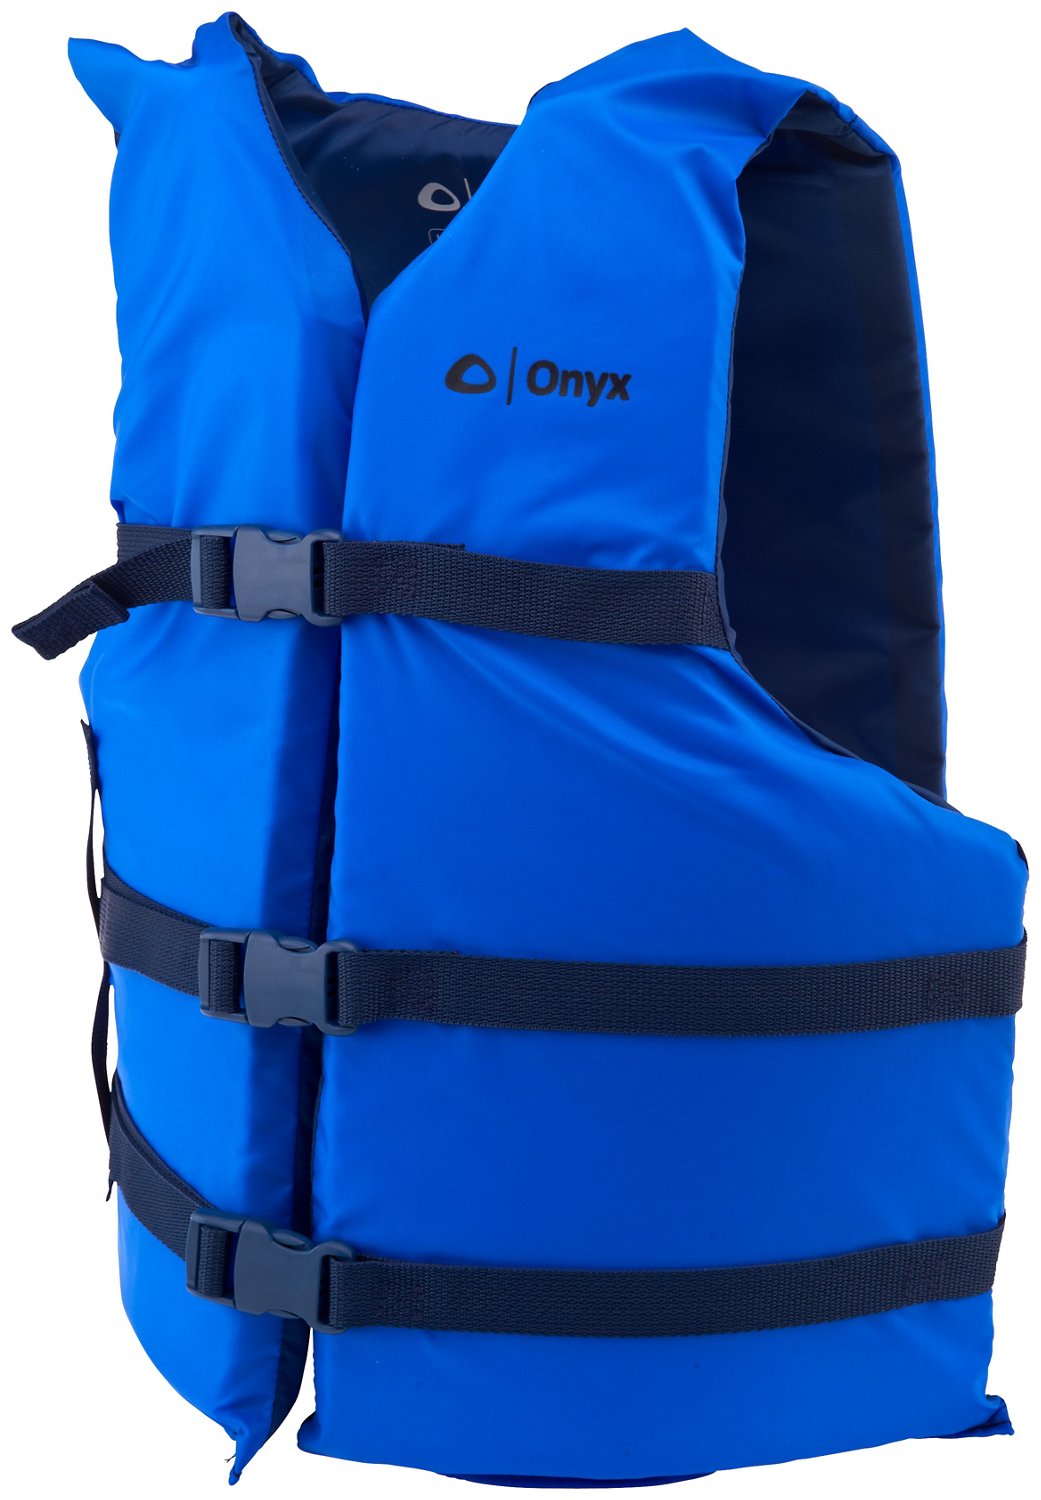 Onyx Outdoor Adults' Universal General Boating Life Vest | Academy